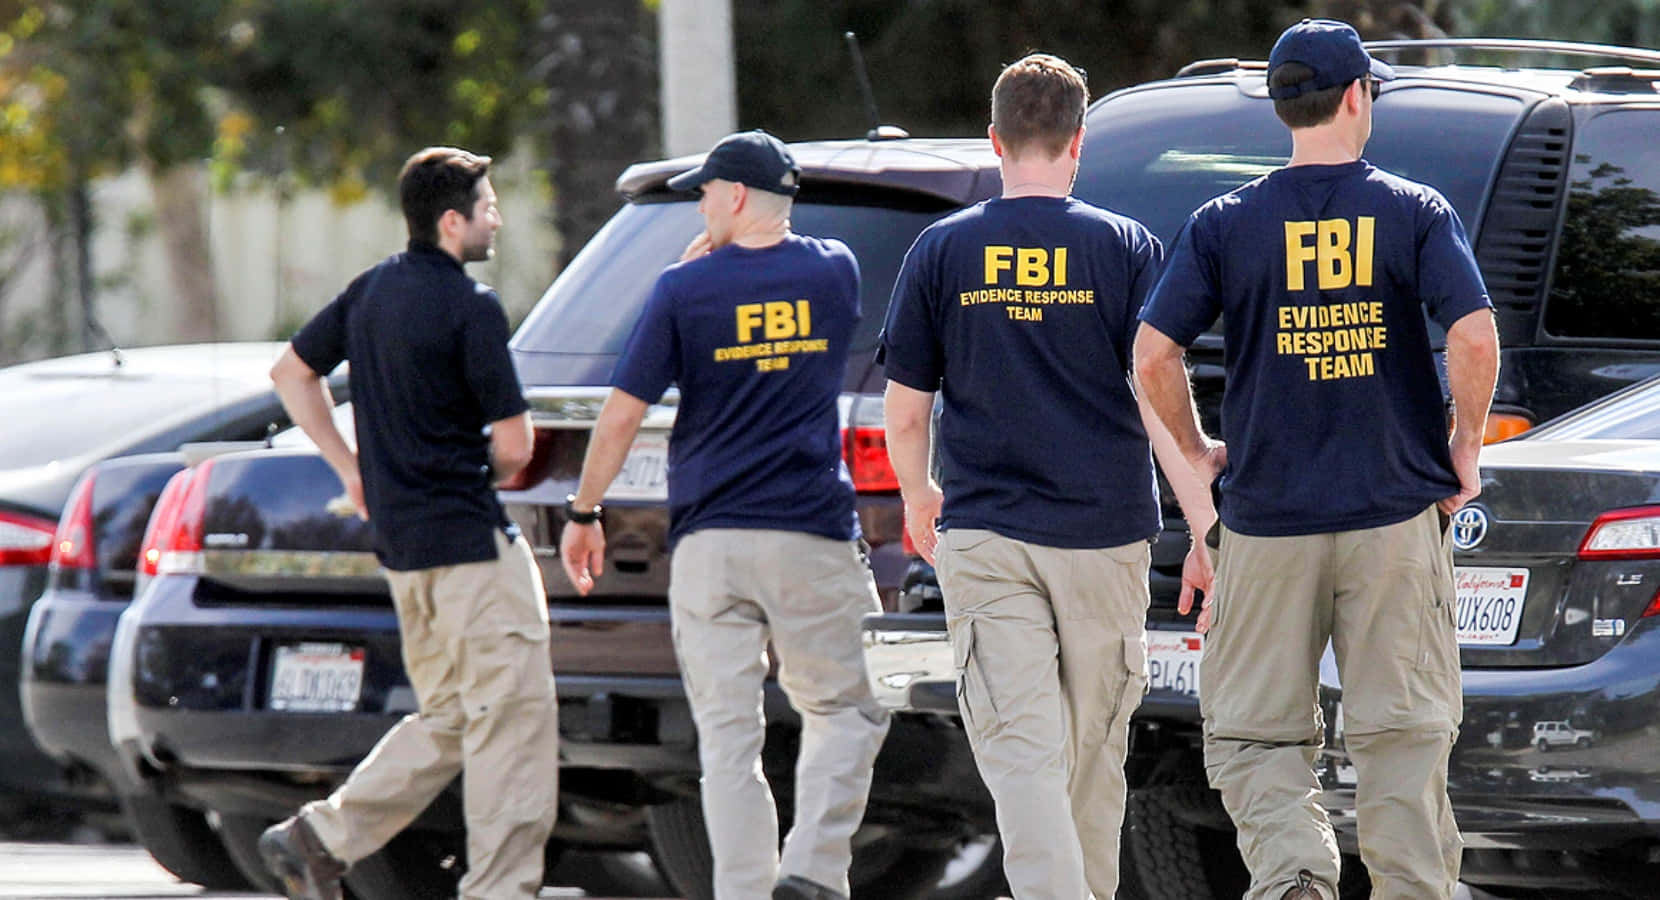 Fbi Agents Walk Past A Car In Front Of A Building